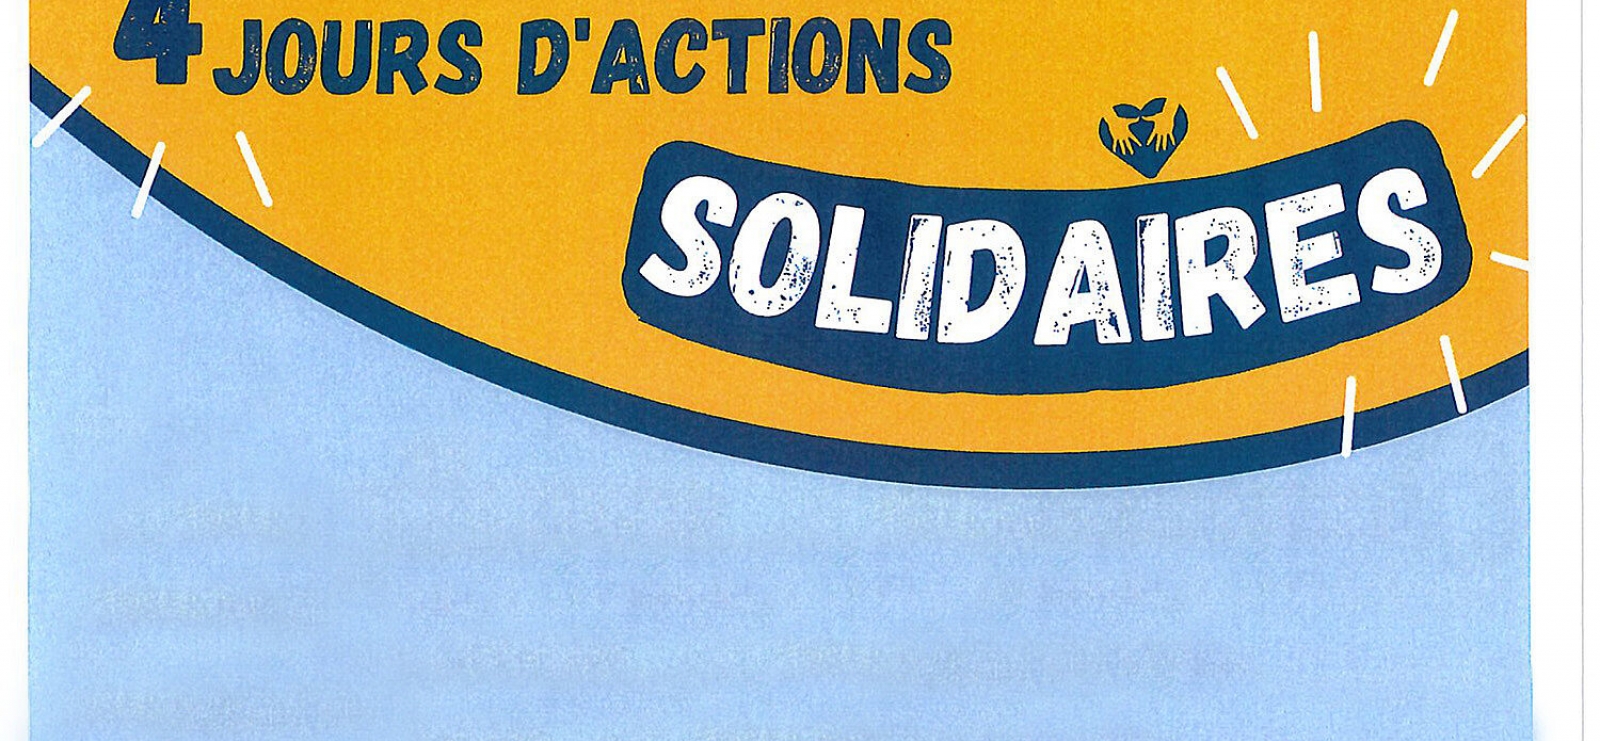 4 jours d'actions solidaires